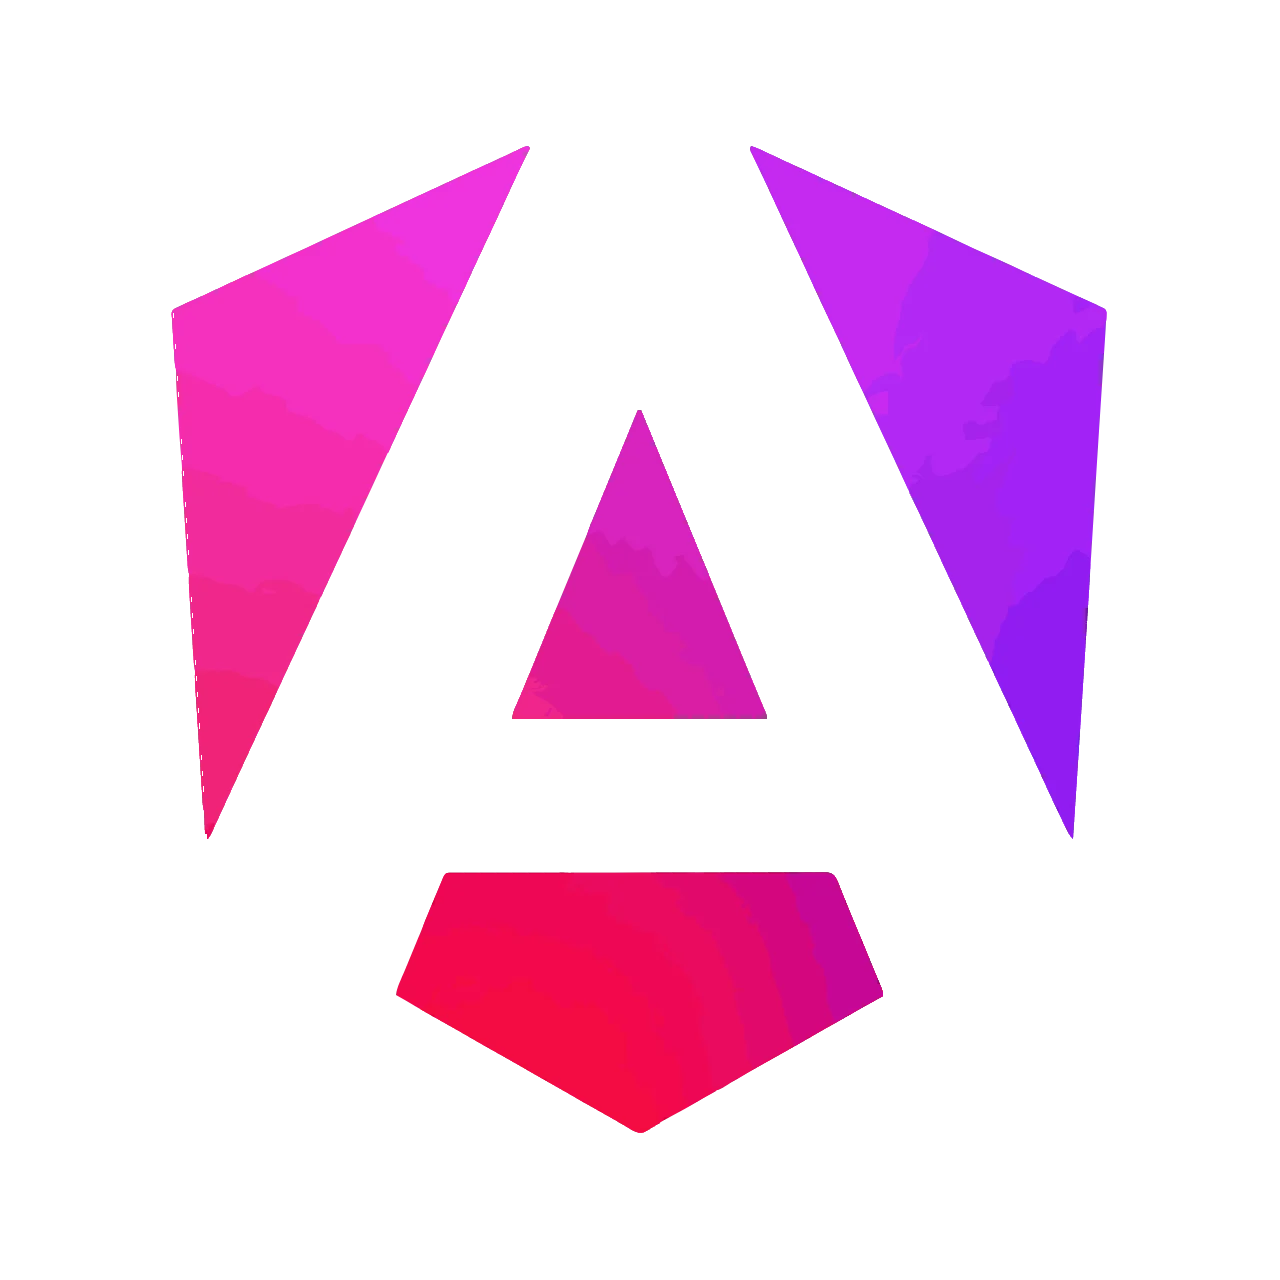 Loading Components Dynamically in Angular 9 with Ivy cover image